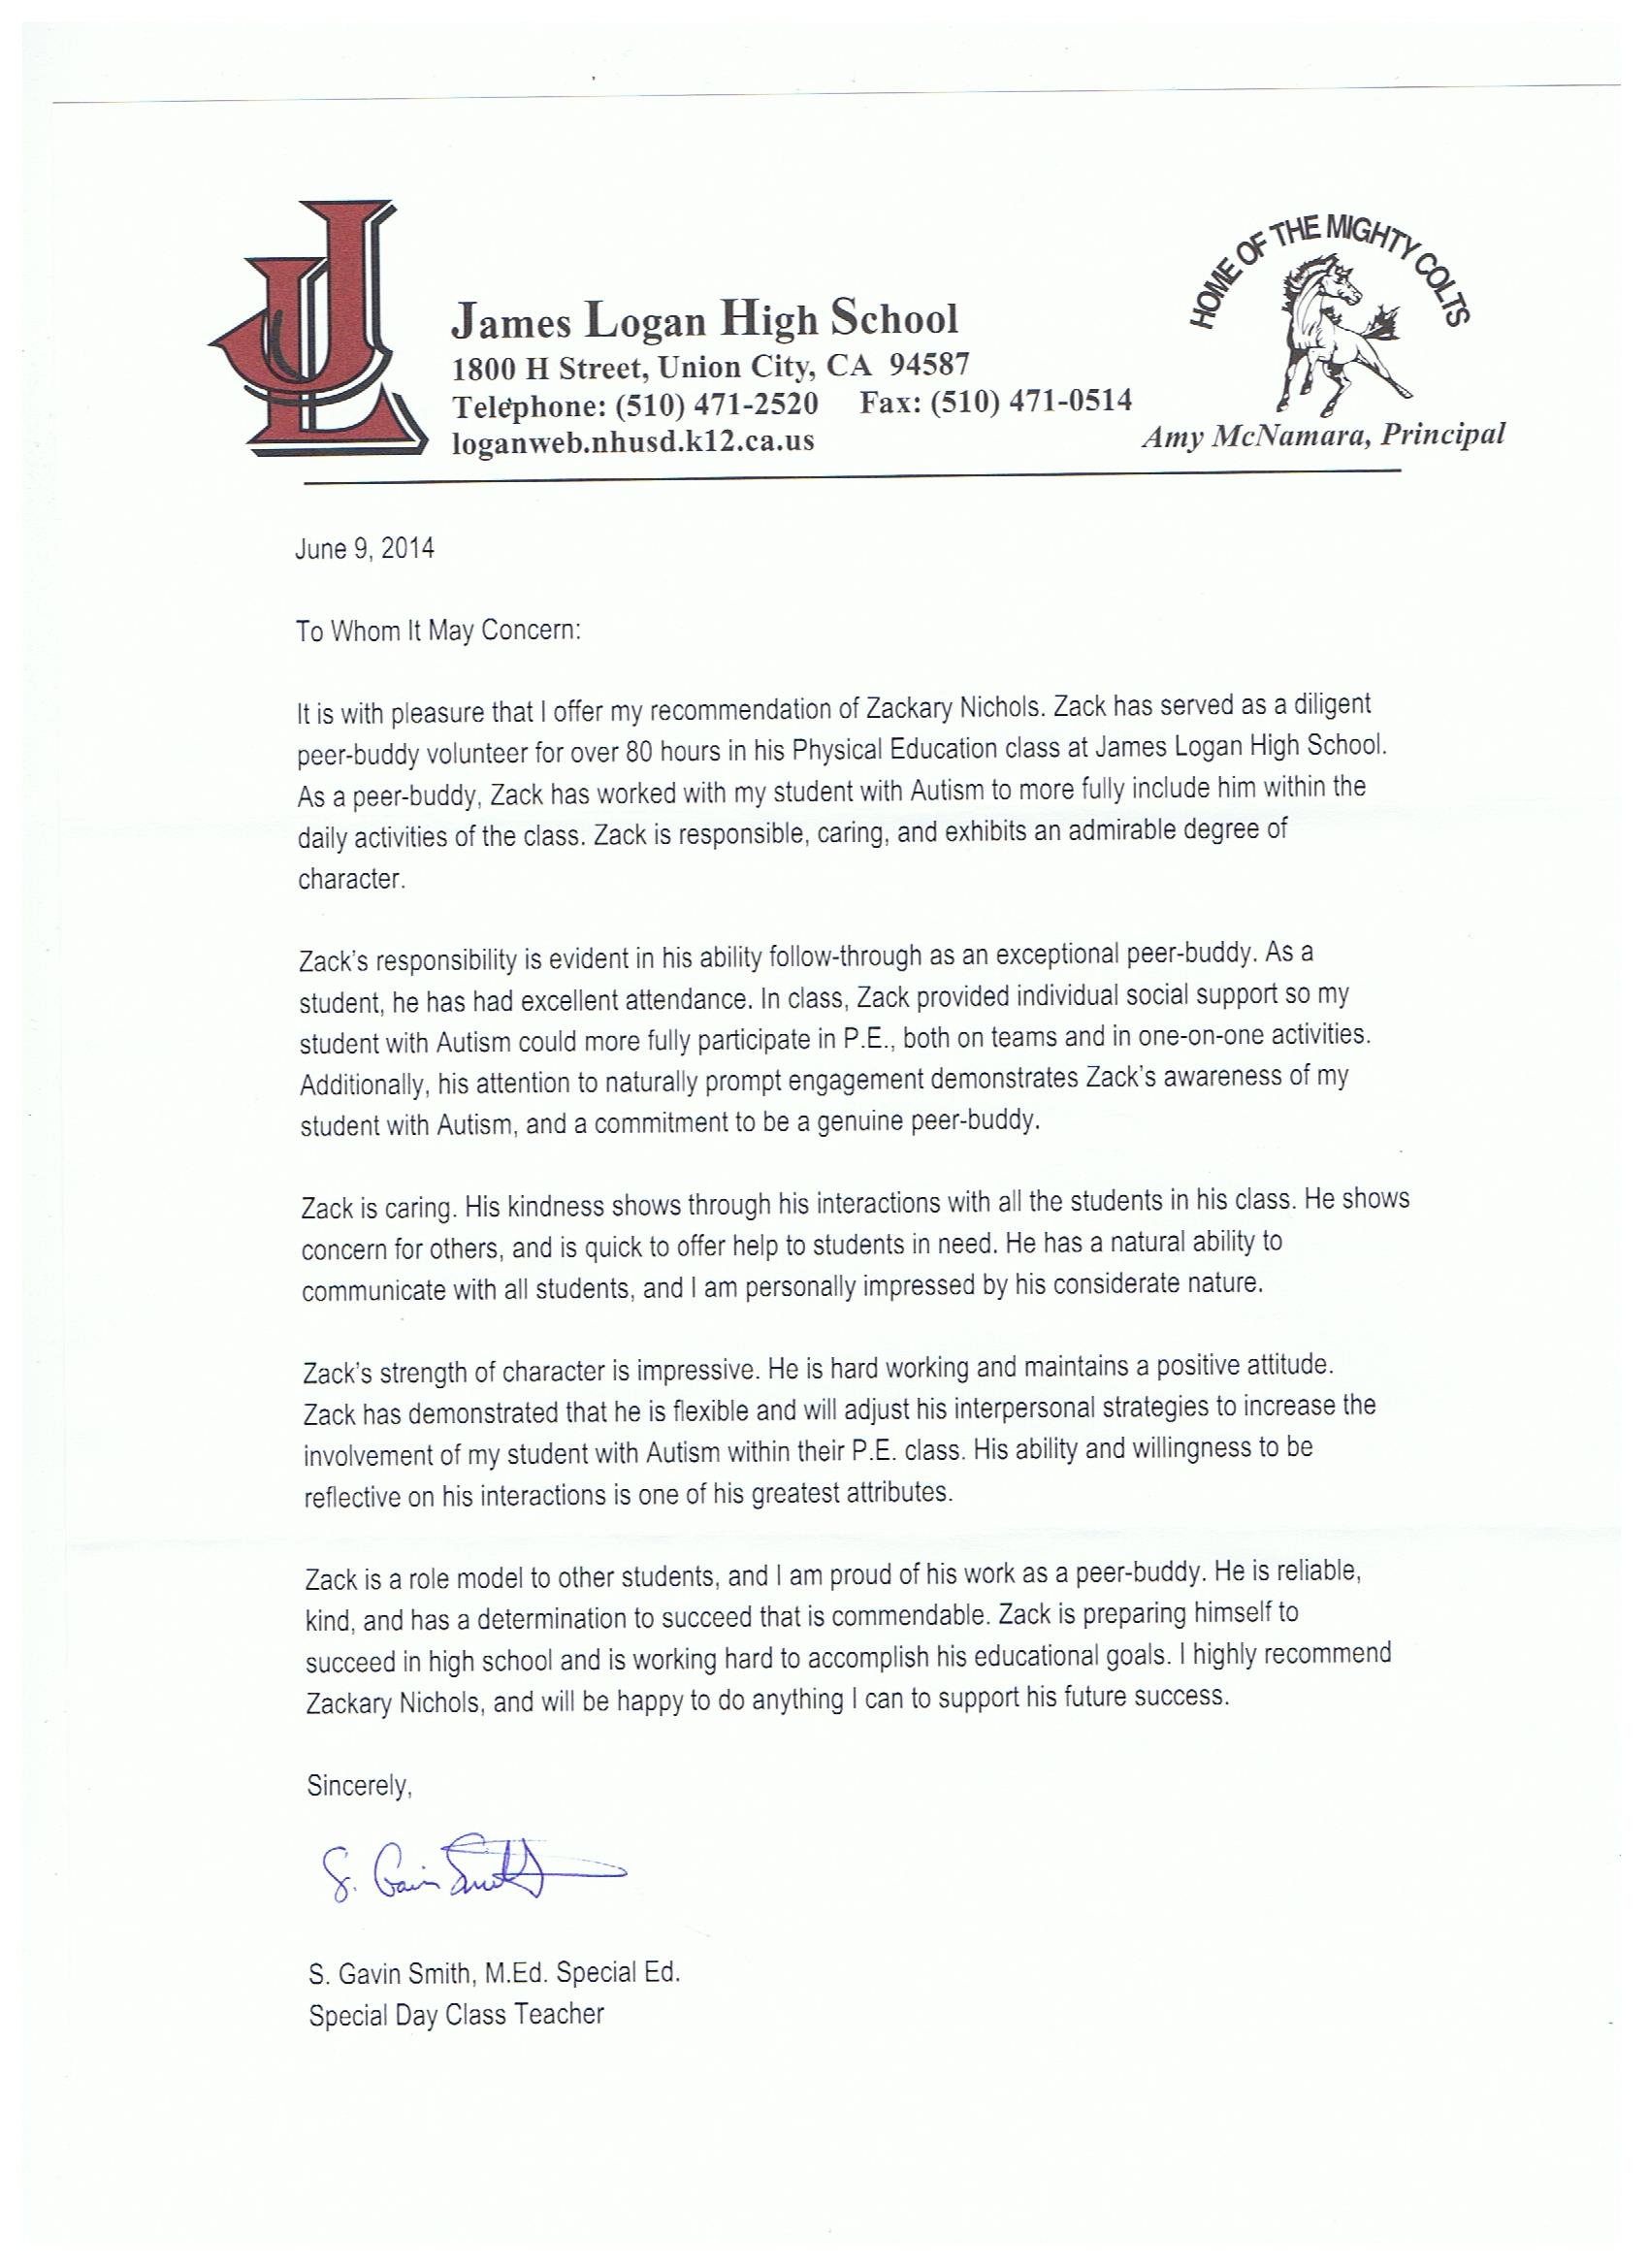 Letter Of Recommendation For Special Education Teacher from zackarynichols.files.wordpress.com